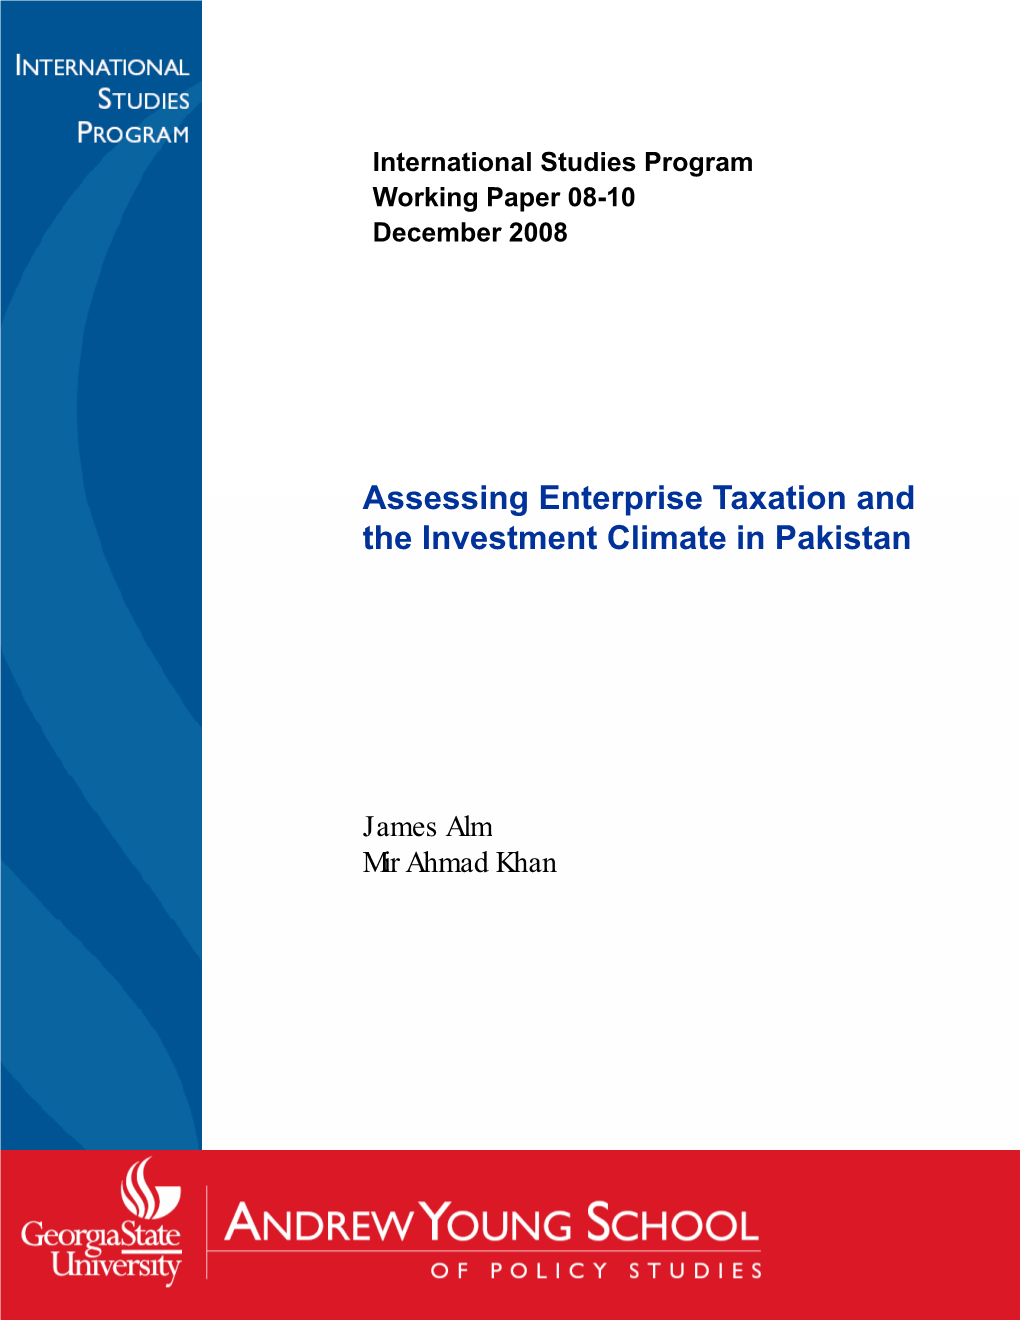 Assessing Enterprise Taxation and the Investment Climate in Pakistan